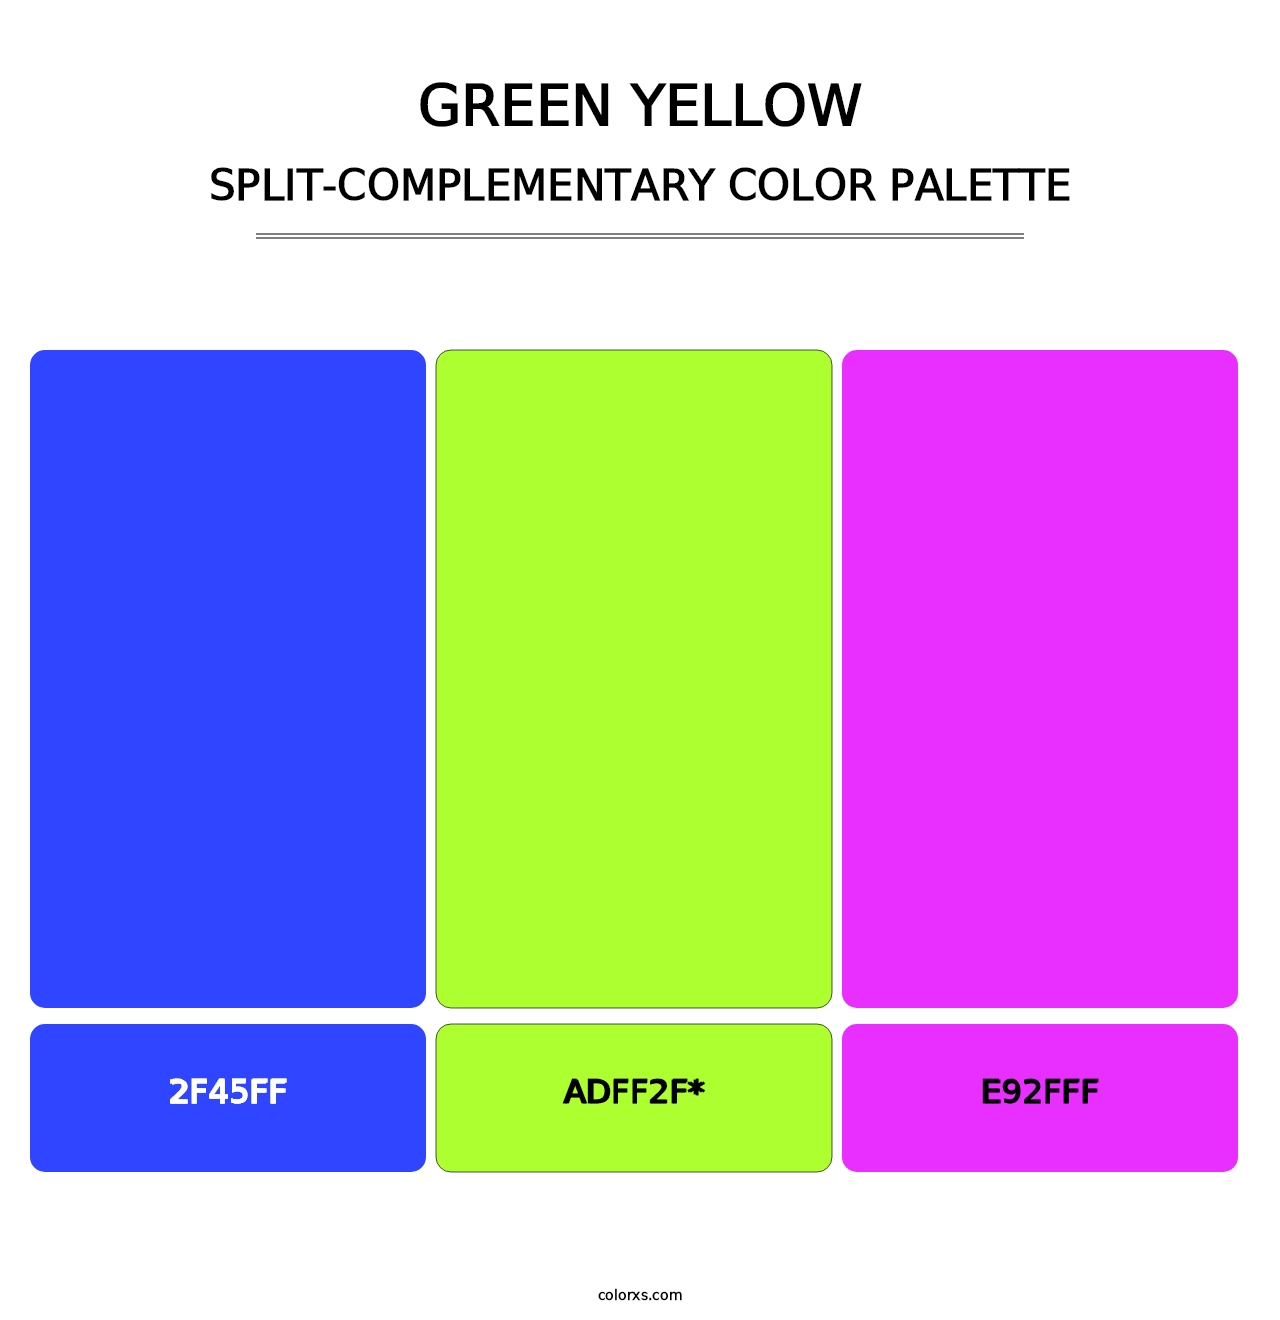 Green Yellow - Split-Complementary Color Palette